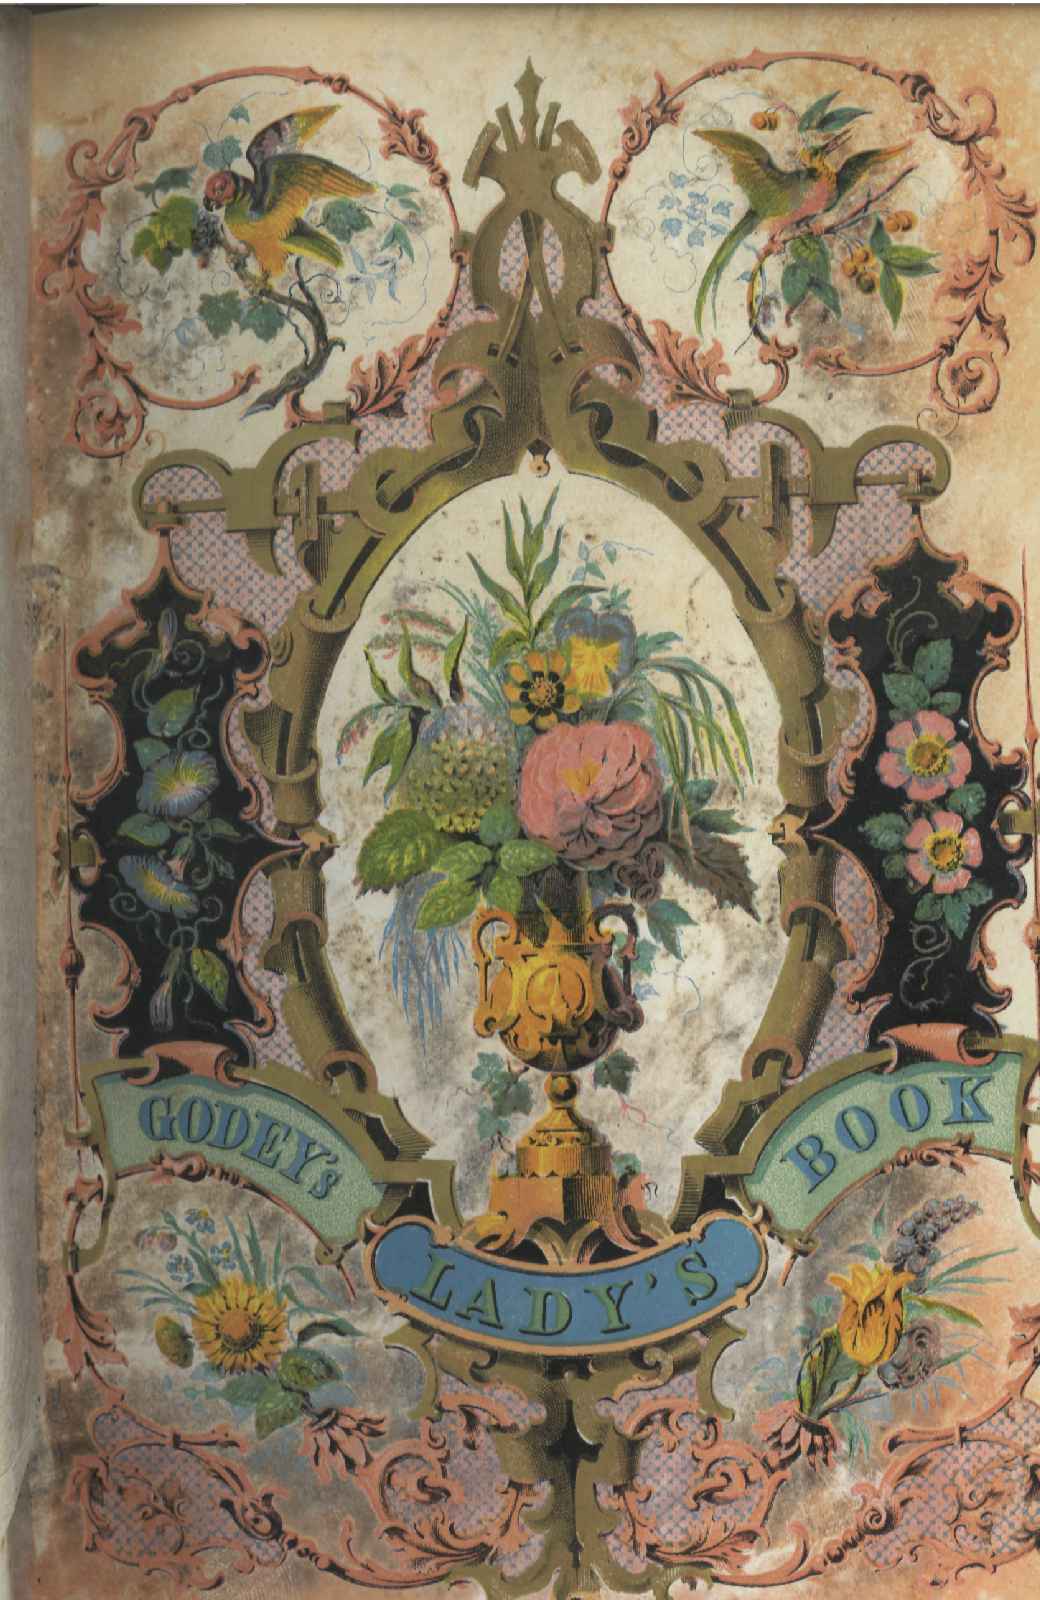 Colour Page: GODEY'S LADY'S BOOK